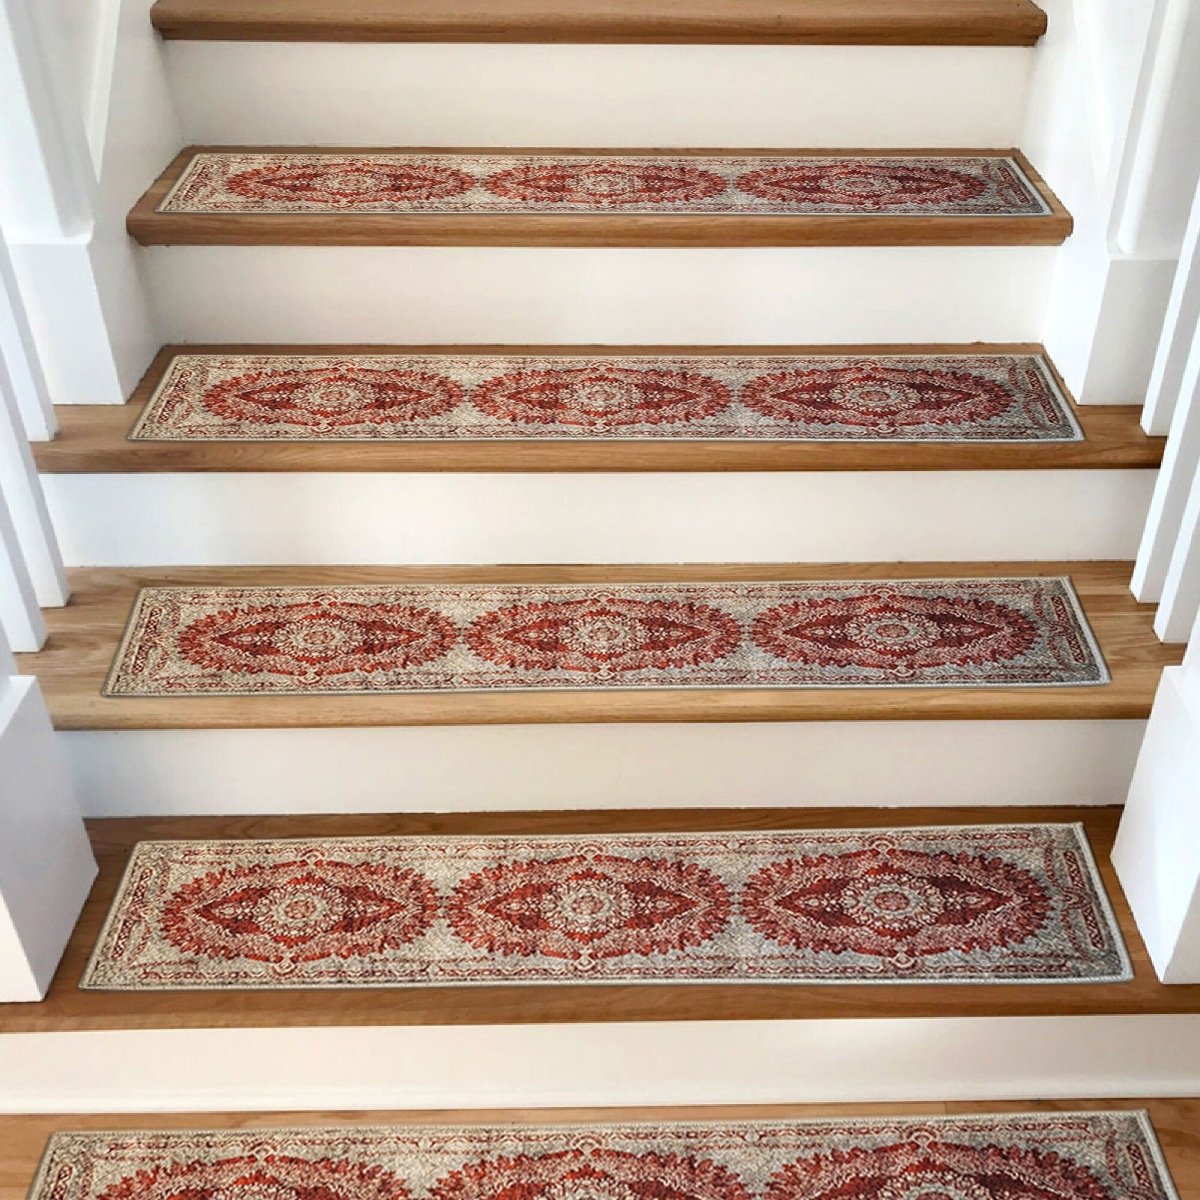 Persian Red Stair Treads Rug, Stair Carpet, Aesthetic Stair Runner, Ultra Thin Stair Mat, Modern Step Pad, Non-Slip Rug, Stair Washable - Slips Away - 1653964366_4260771791 -